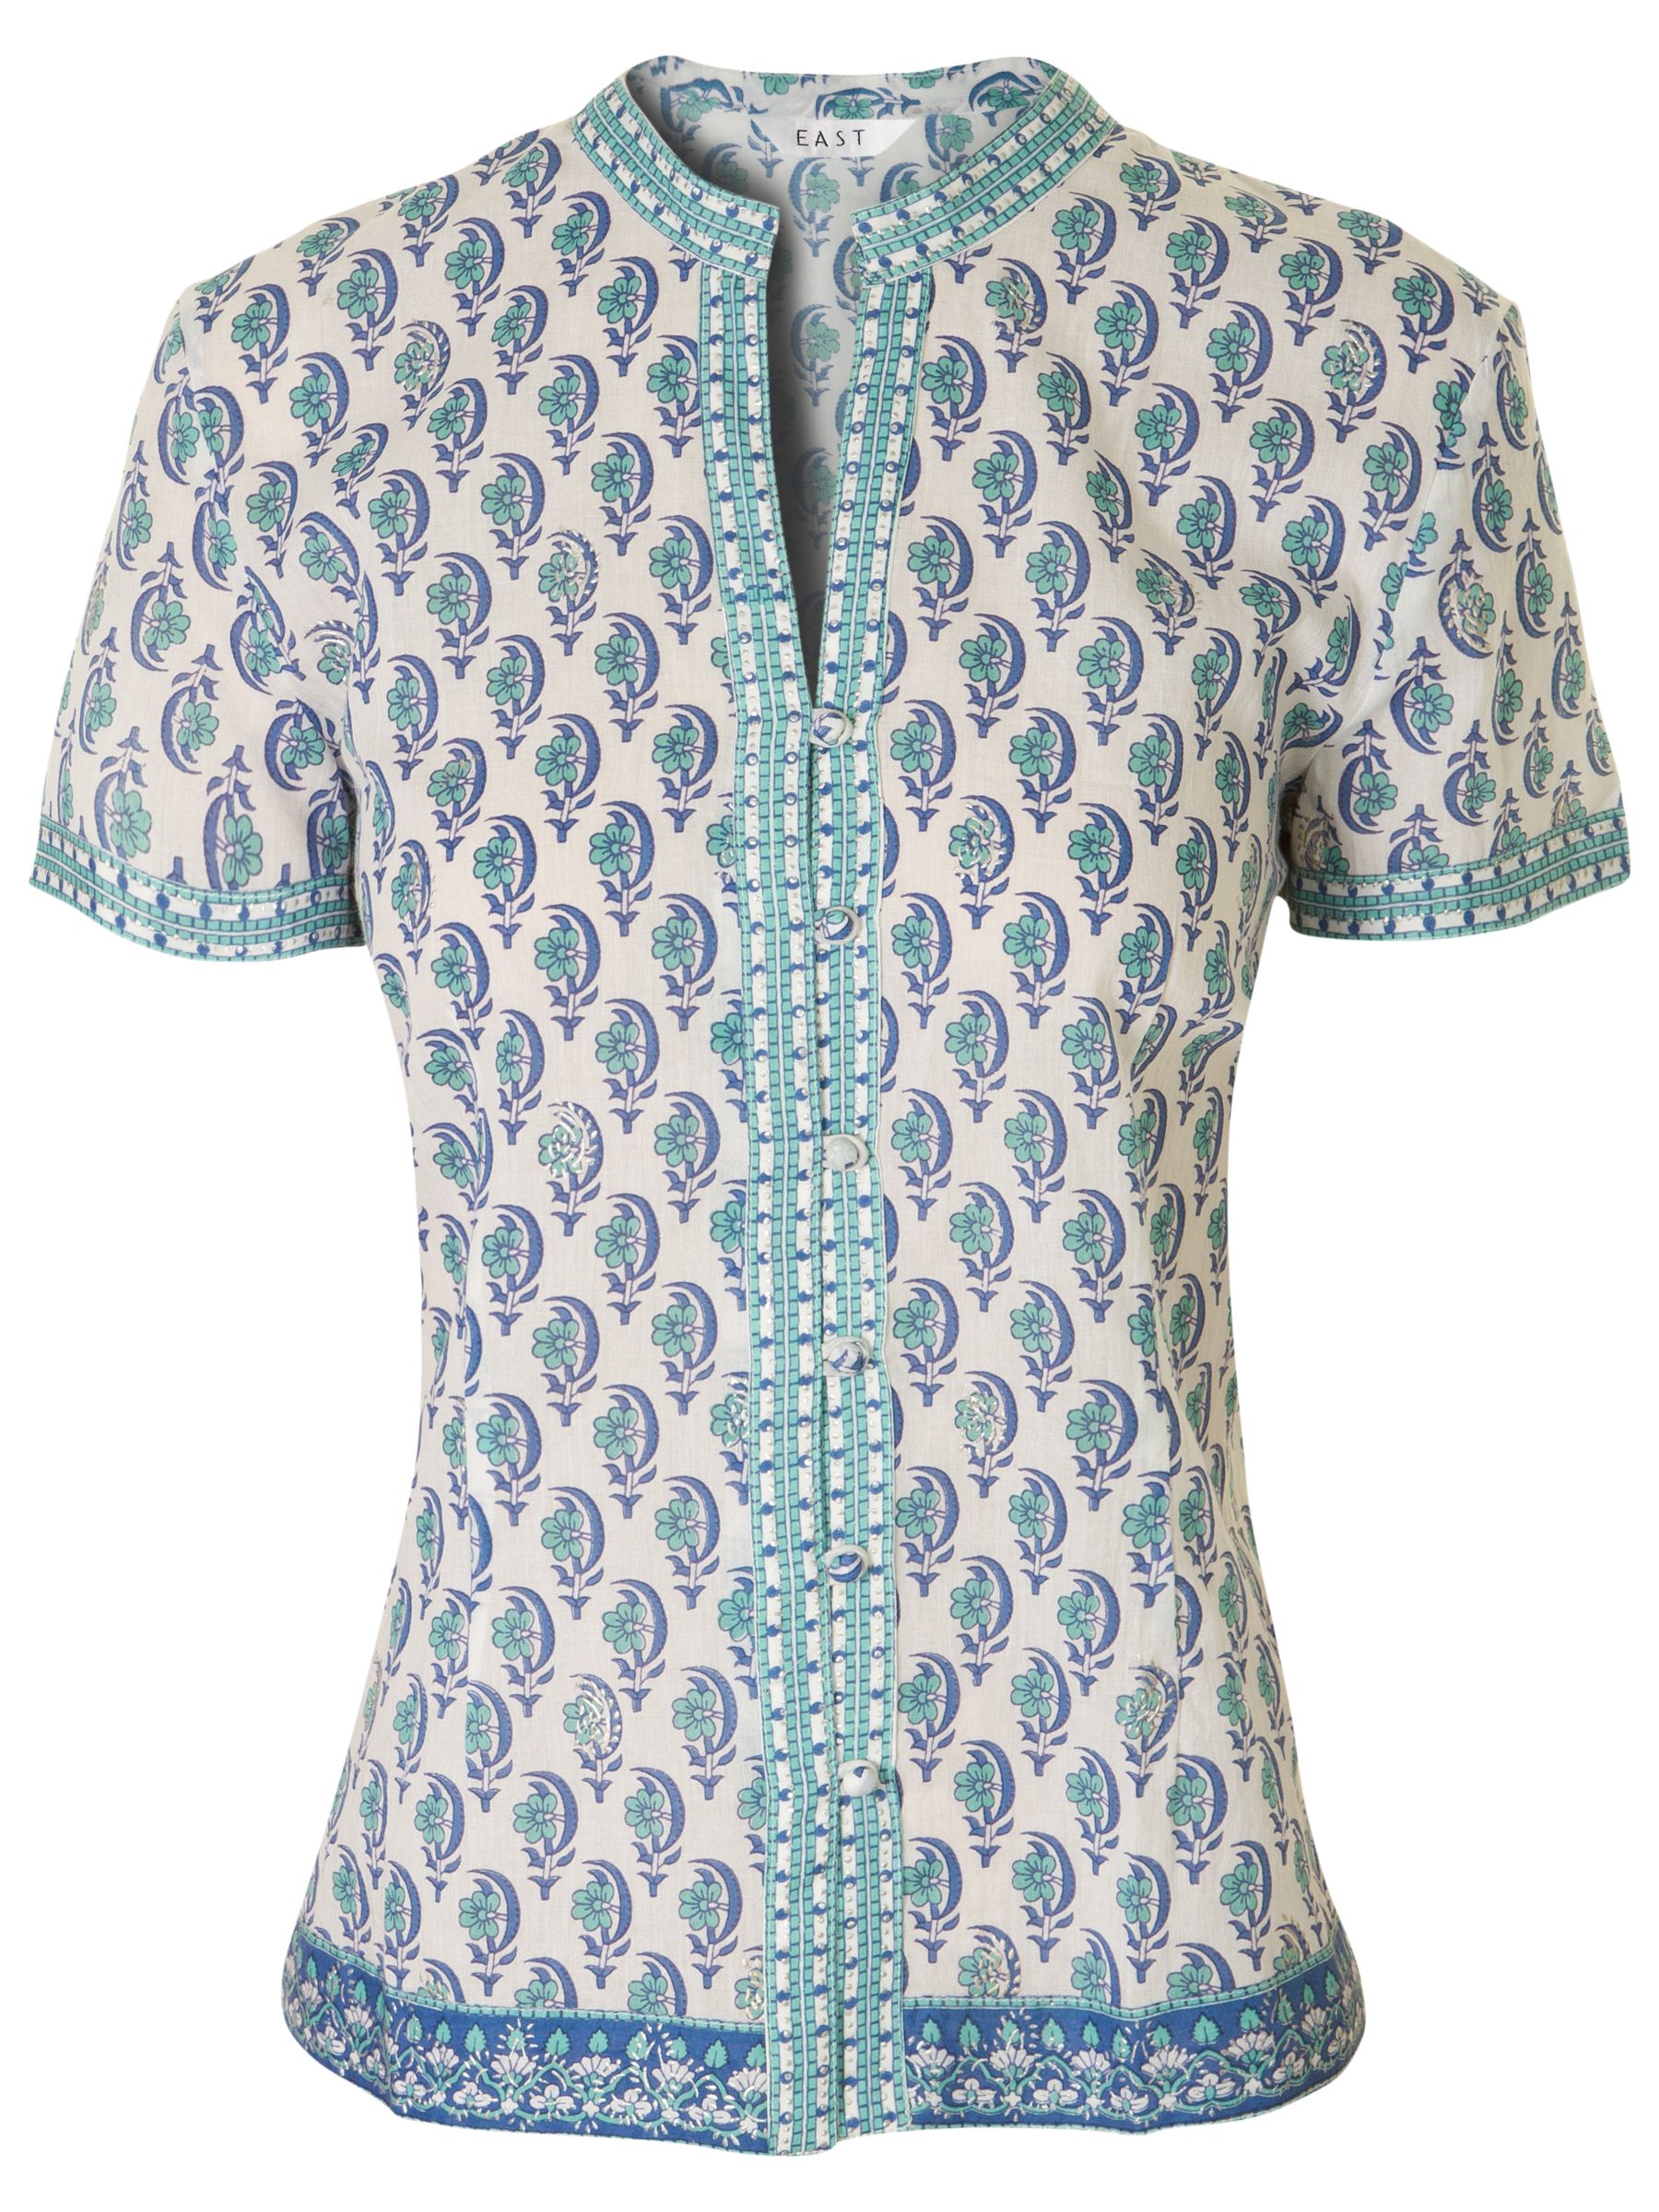 East Trade Winds Short Sleeved Blouse, Green